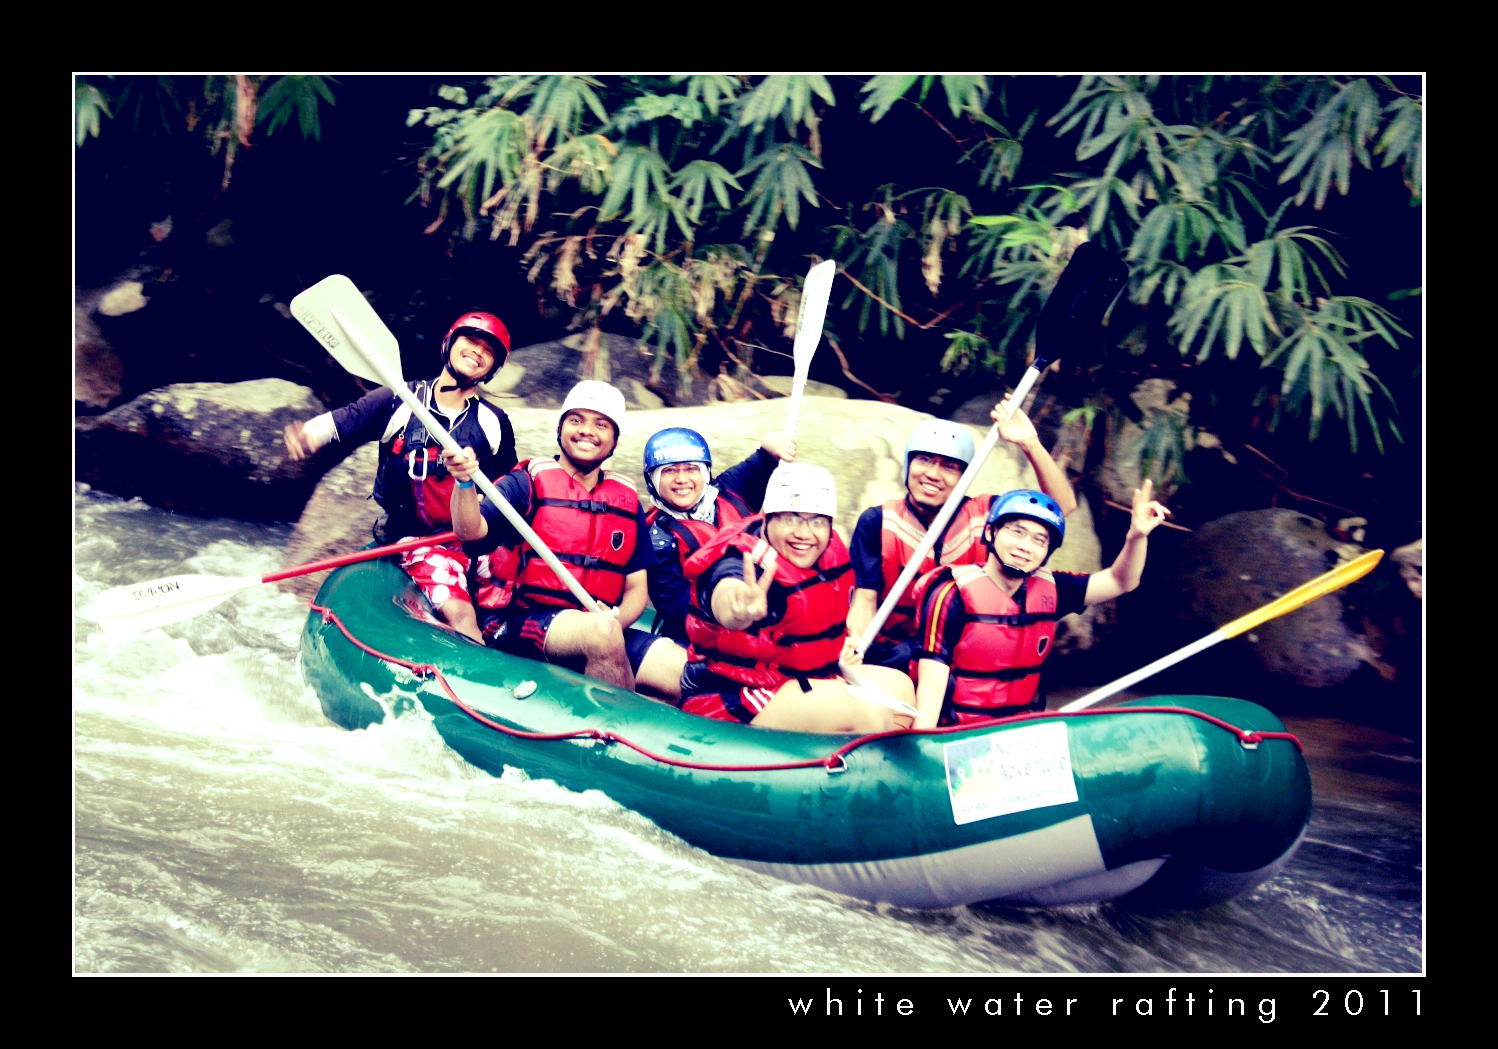 Ice Lemon Tea of LIFE: White water rafting - my first time